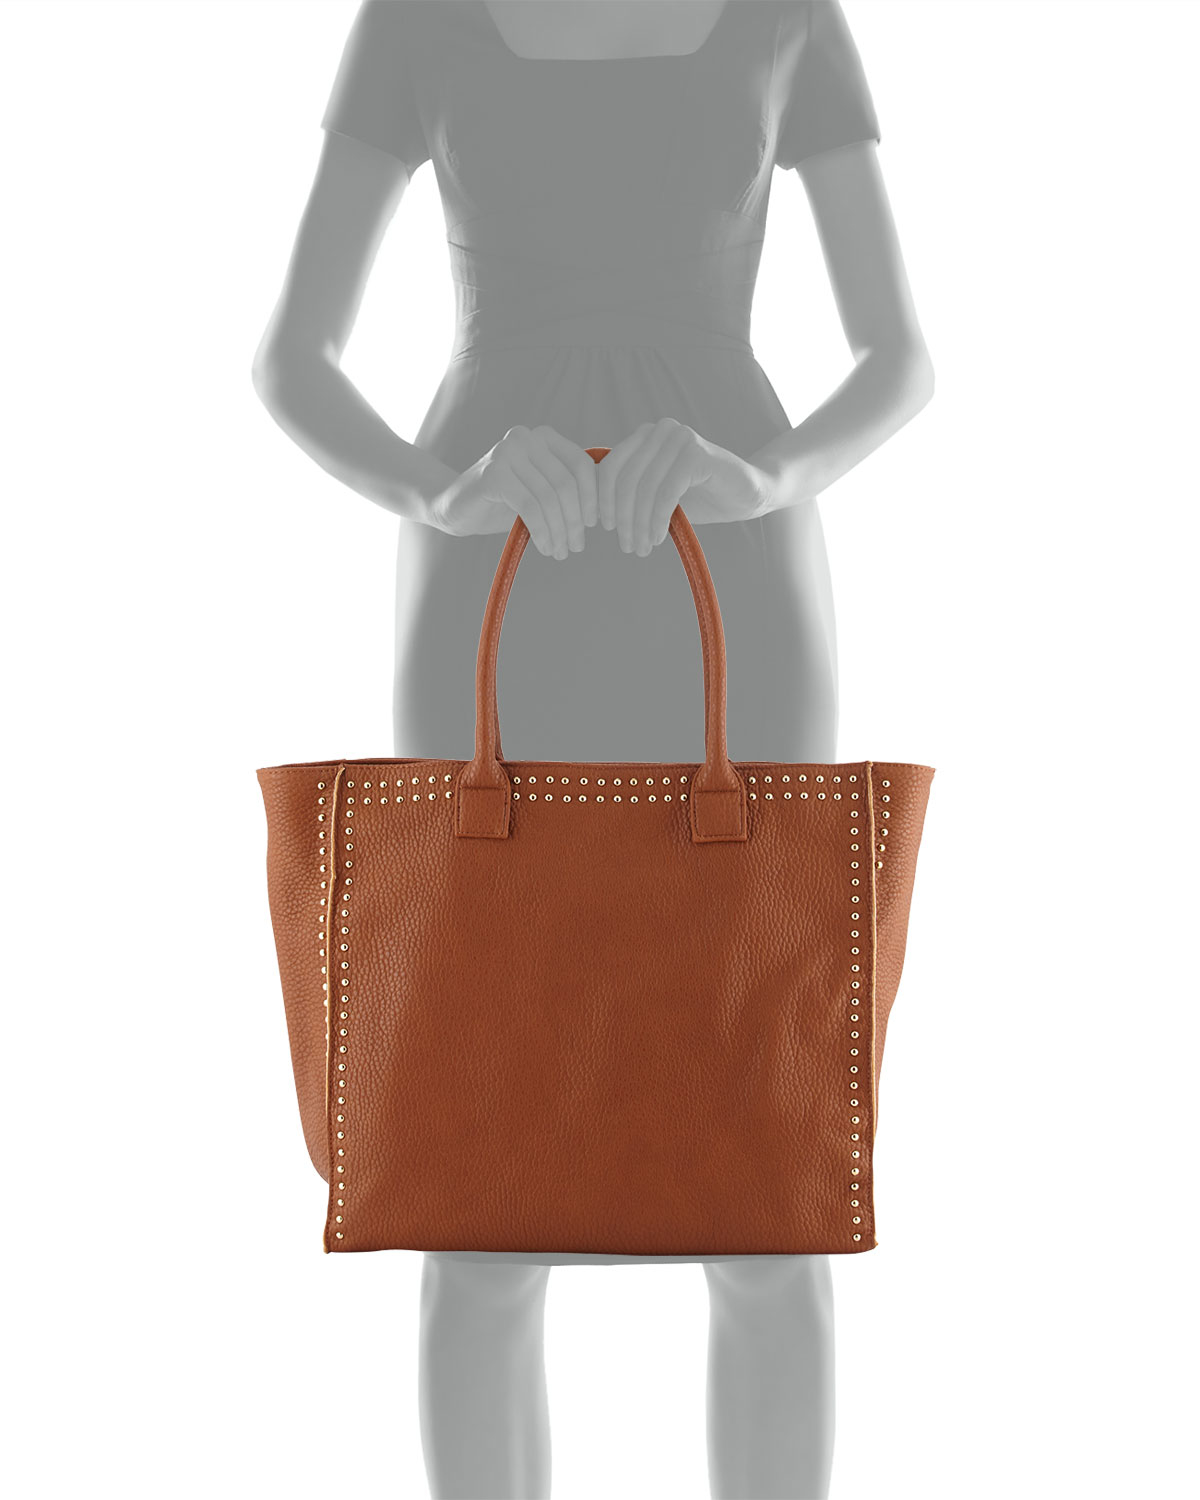 Neiman Marcus Studded-trim Faux-leather Tote Bag in Cognac (Brown) - Lyst